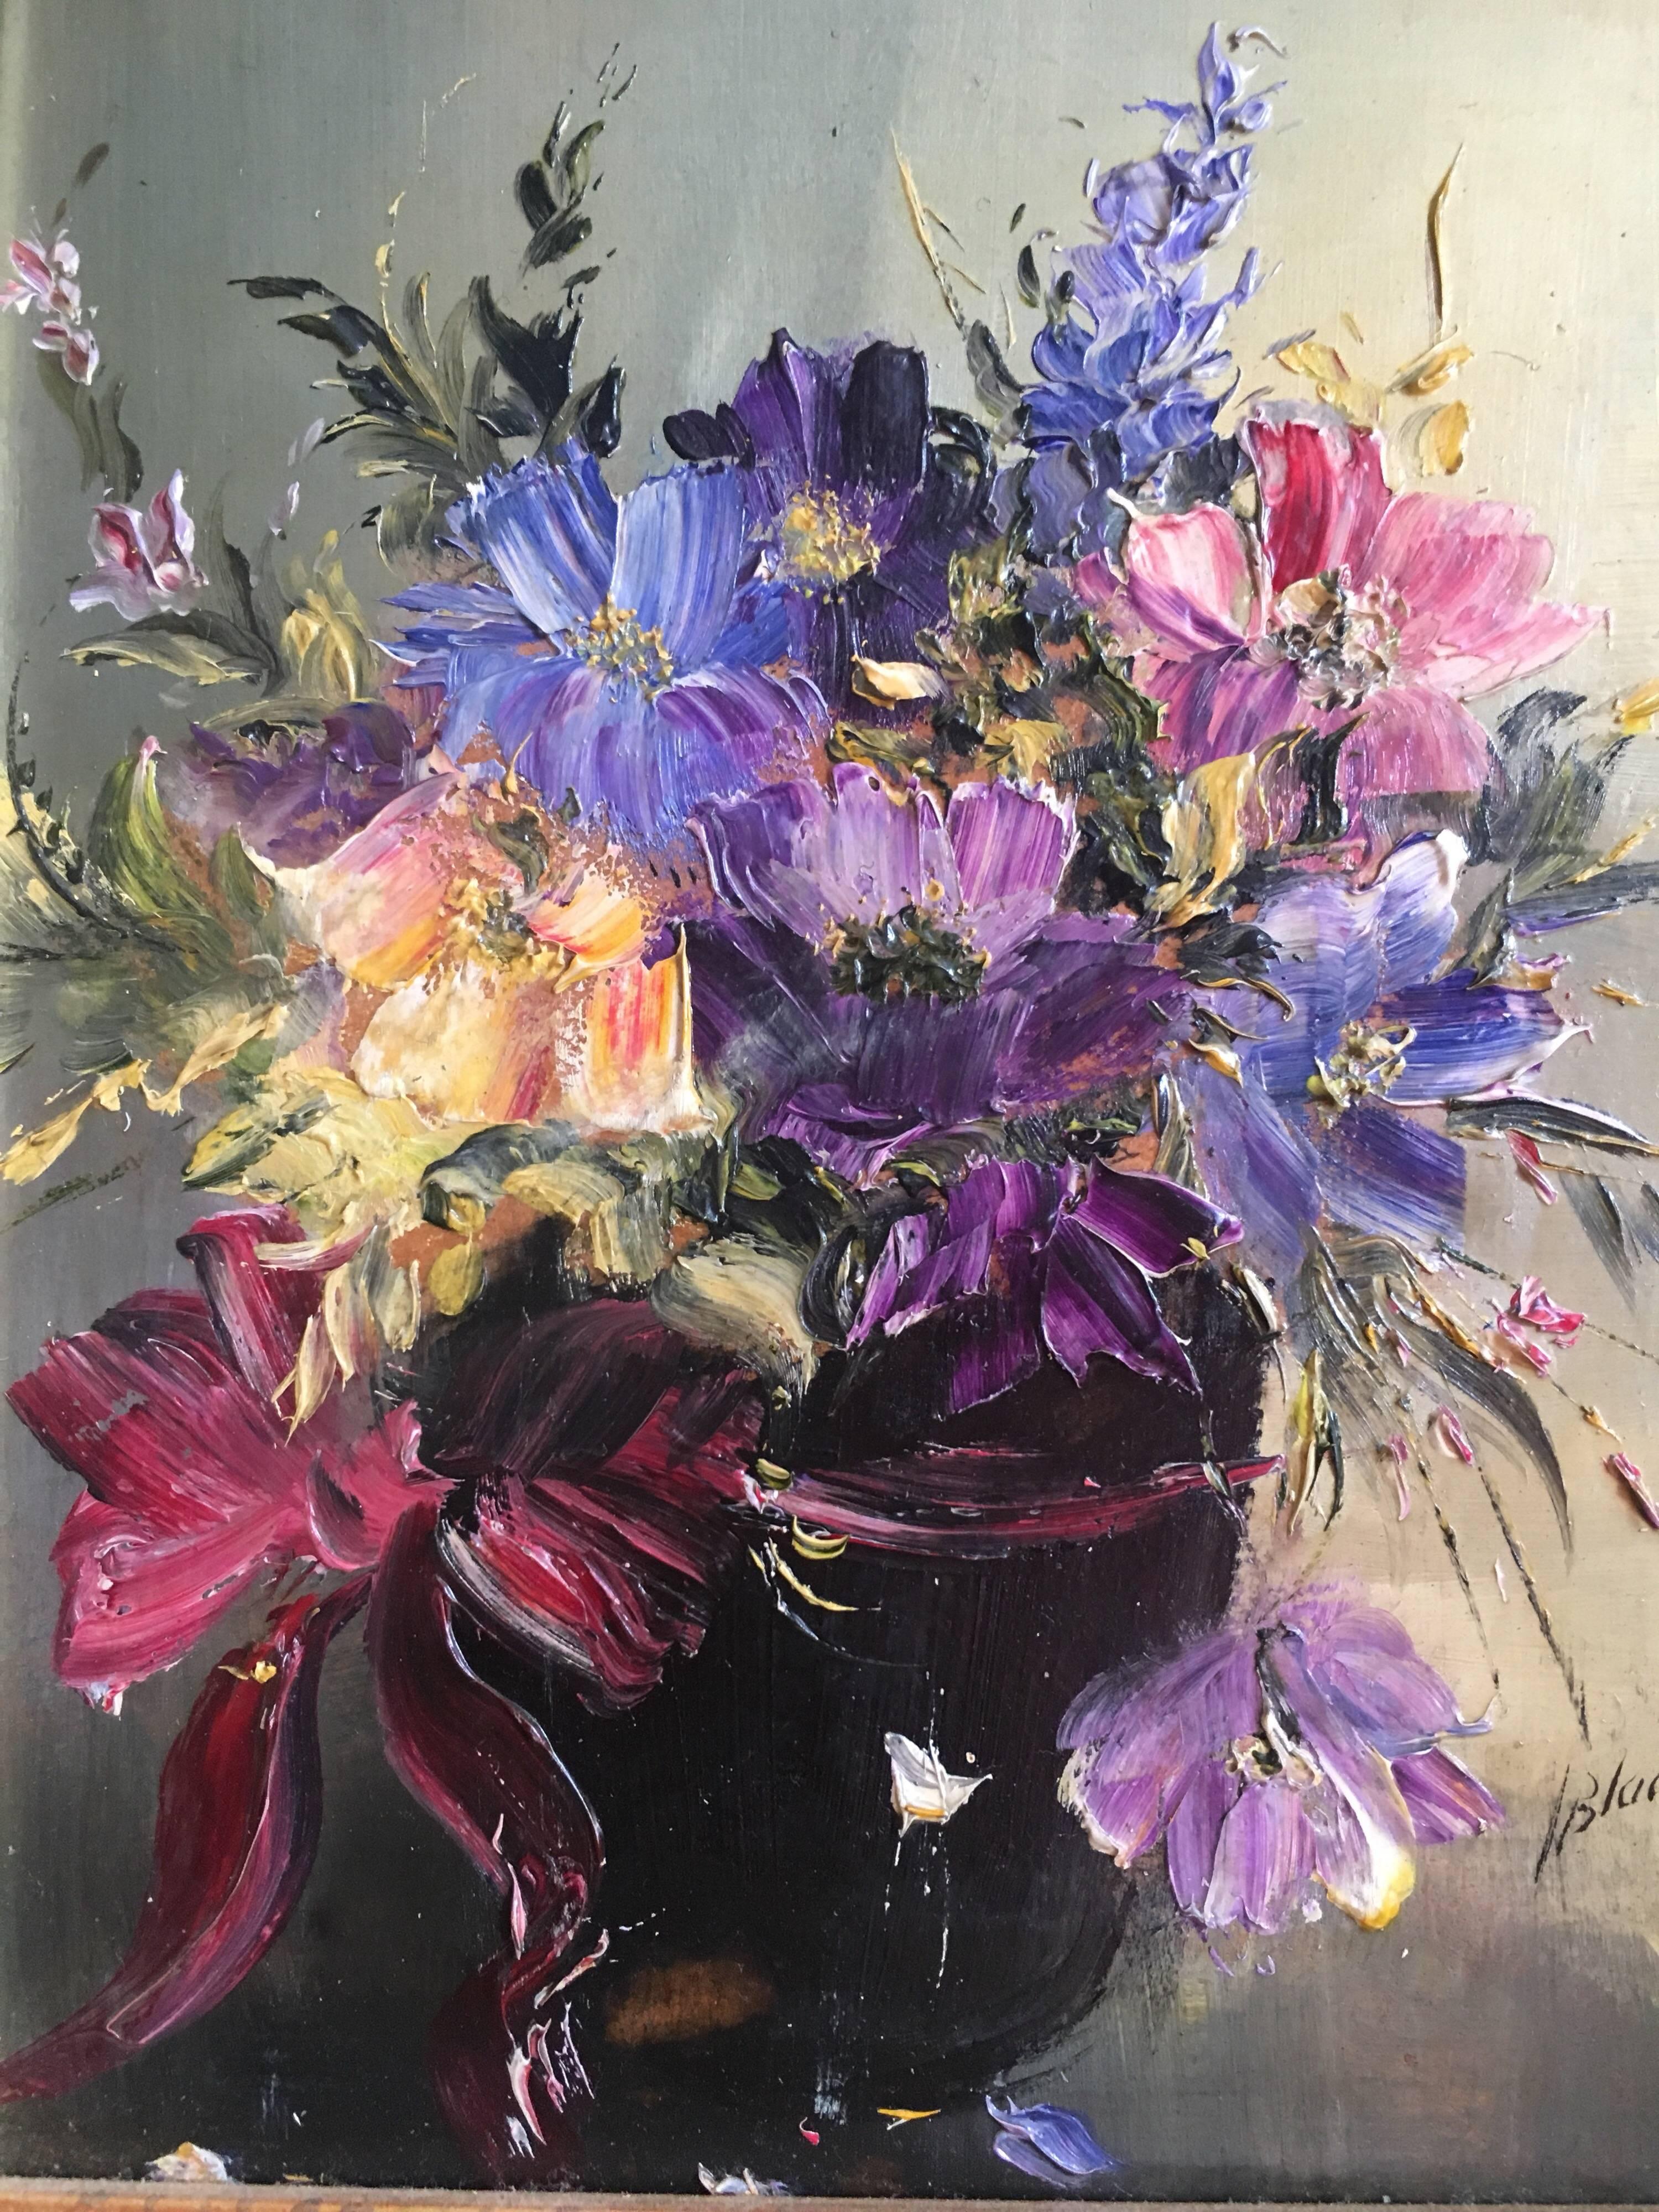 Purple Floral Arrangement
By Lillias Blackie, Scottish Artist, 20th Century
Signed by the artist on the right left hand corner
Oil painting on board, framed
Framed size: 11.5 x 10.5 inches

Beautiful floral arrangement, one that looks like it has